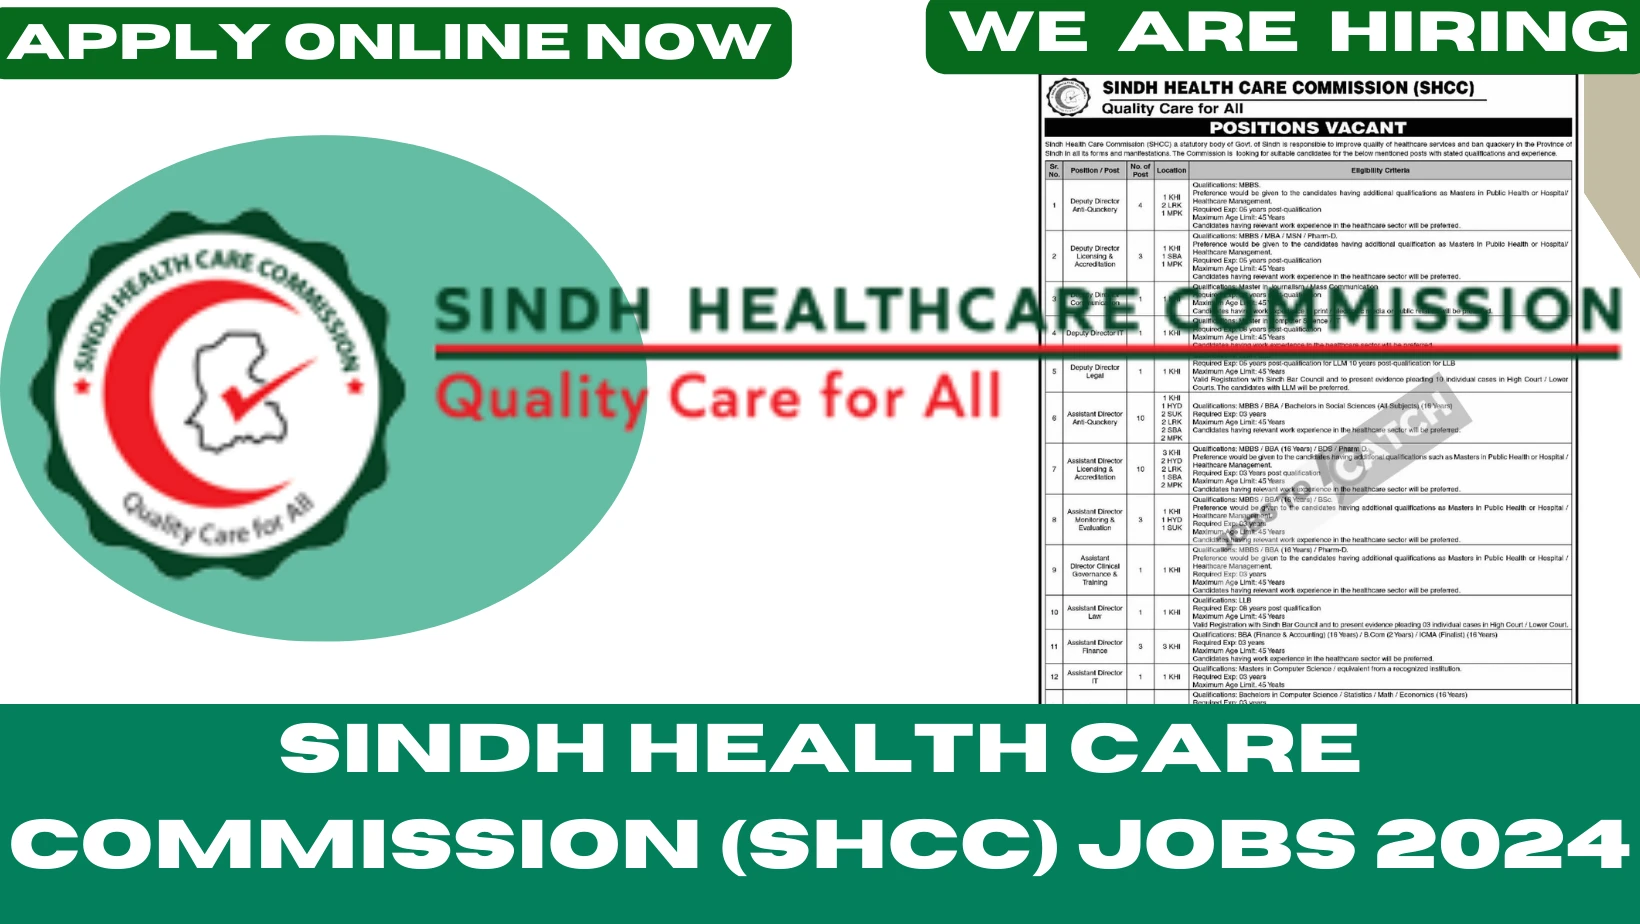 SINDH-HEALTH-CARE-COMMISSION